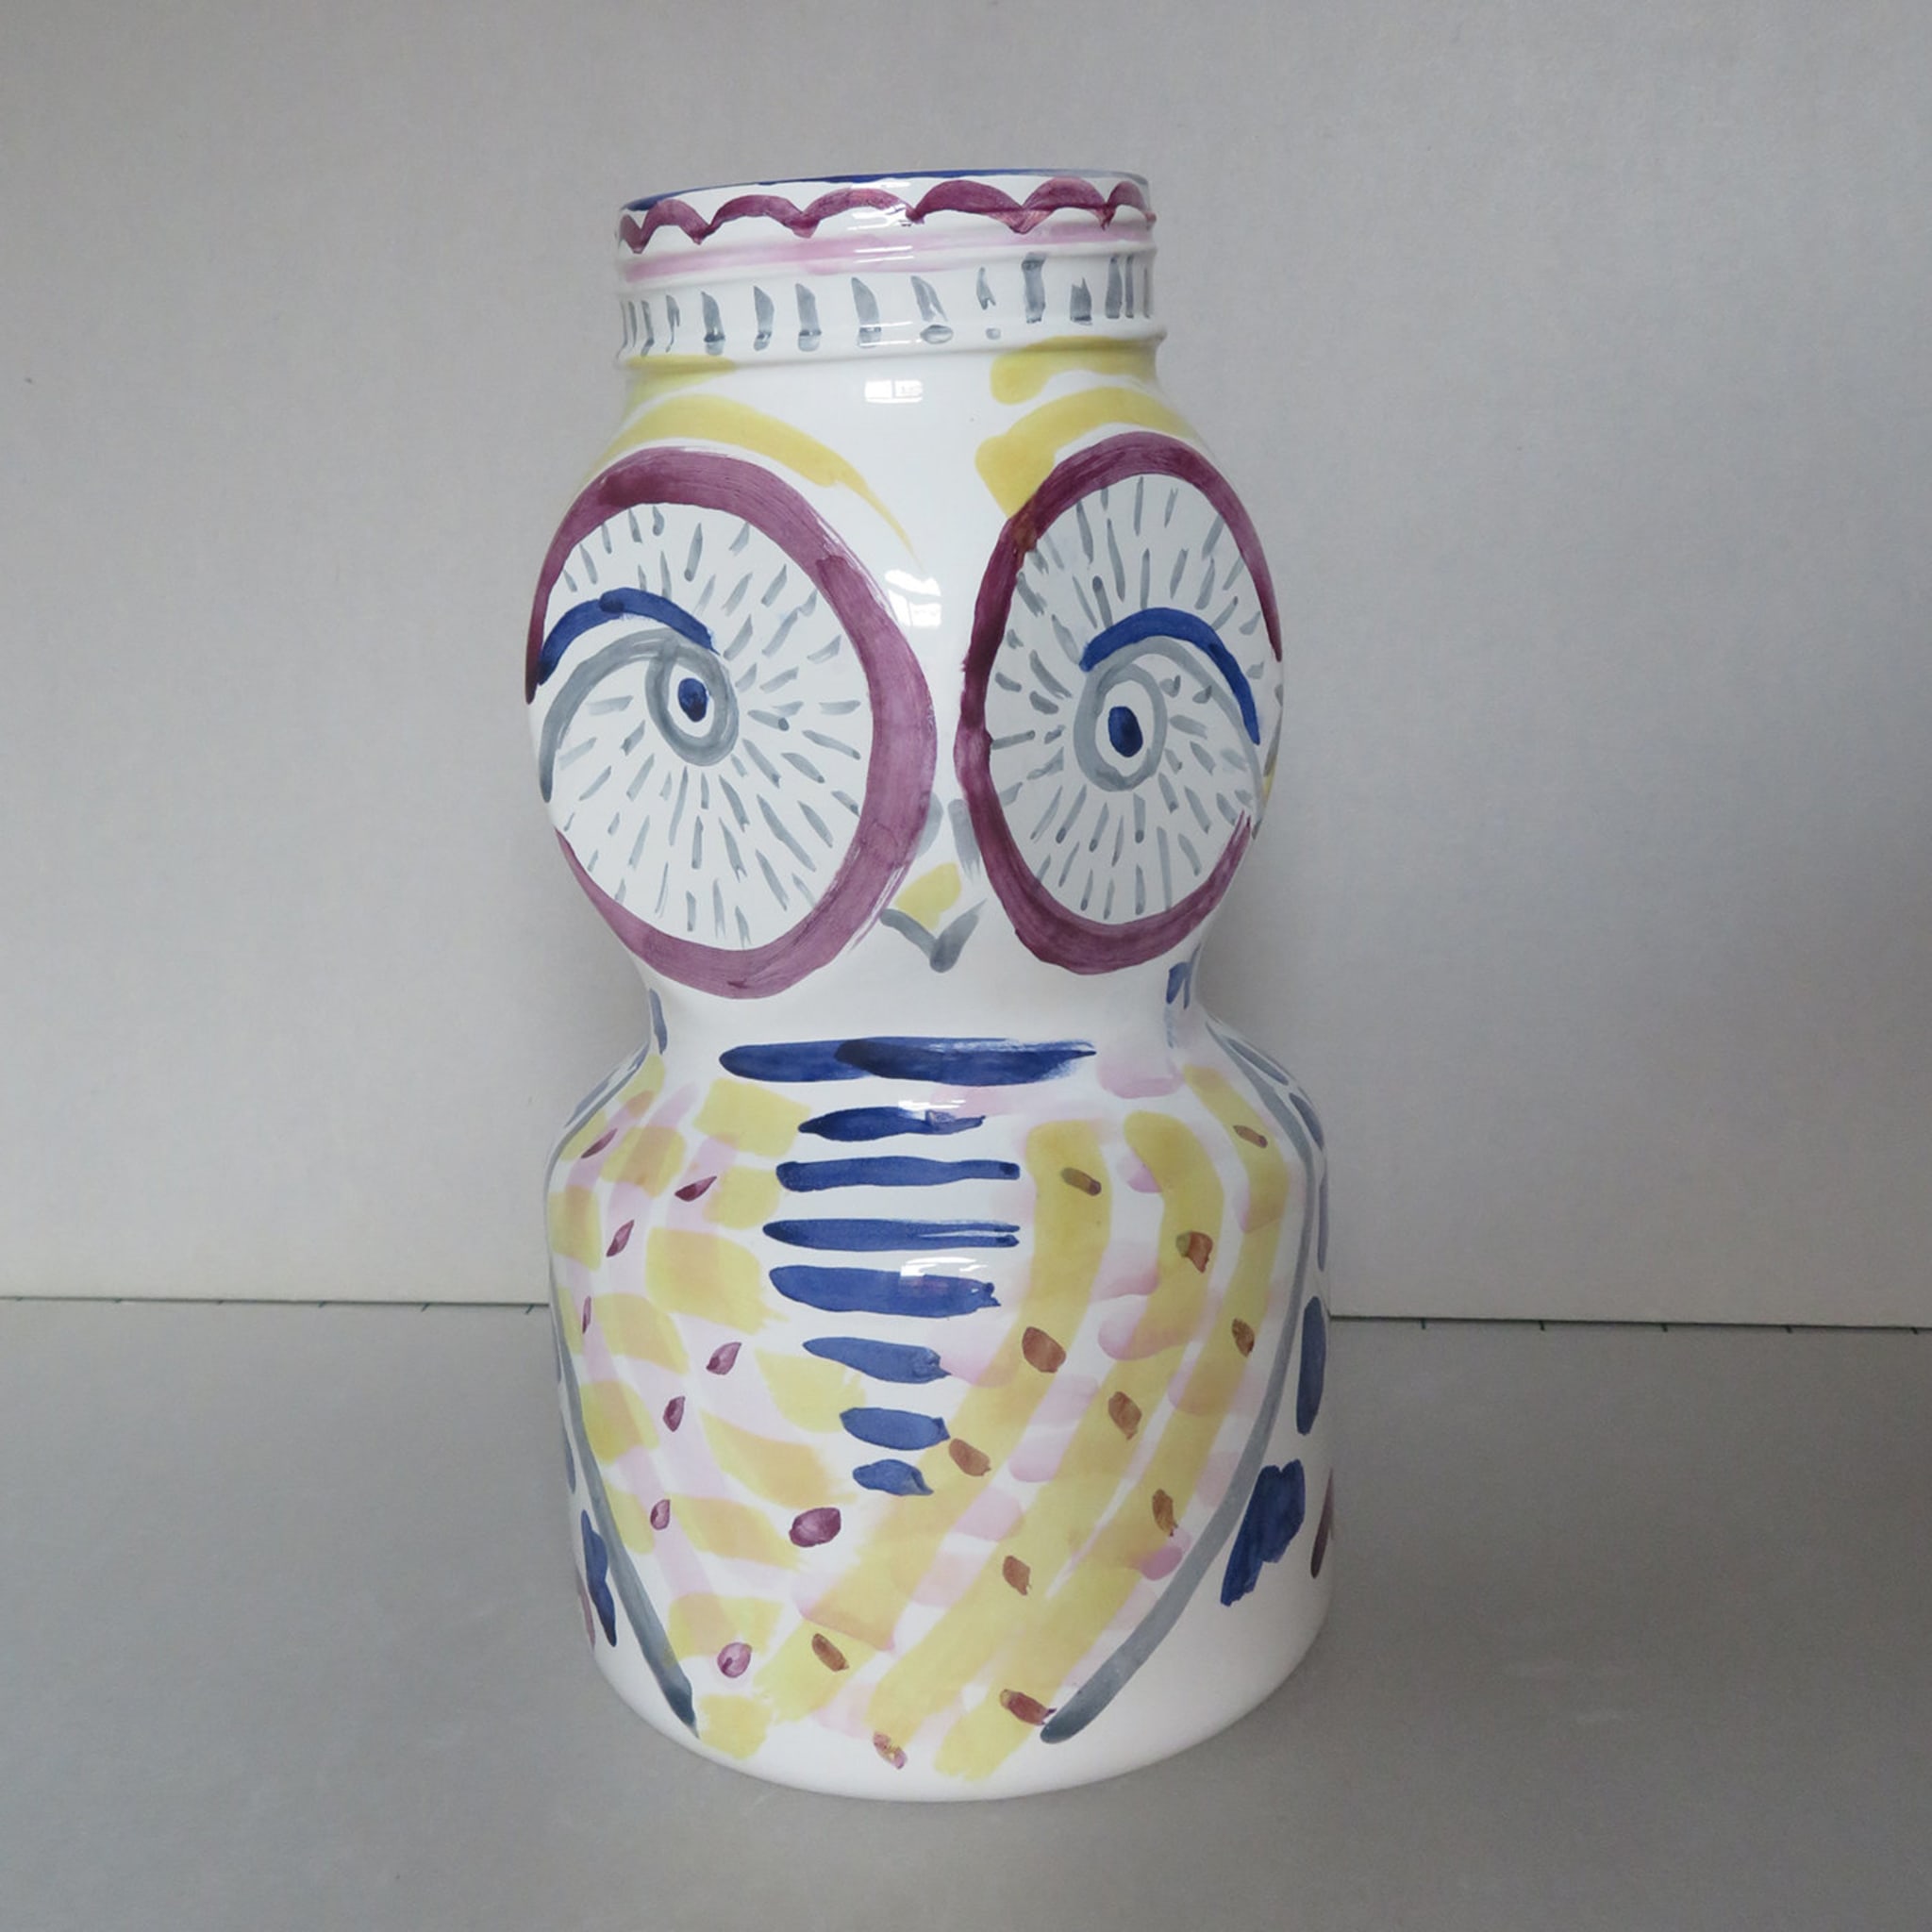 Owl Vase with Cool Colors - Alternative view 1